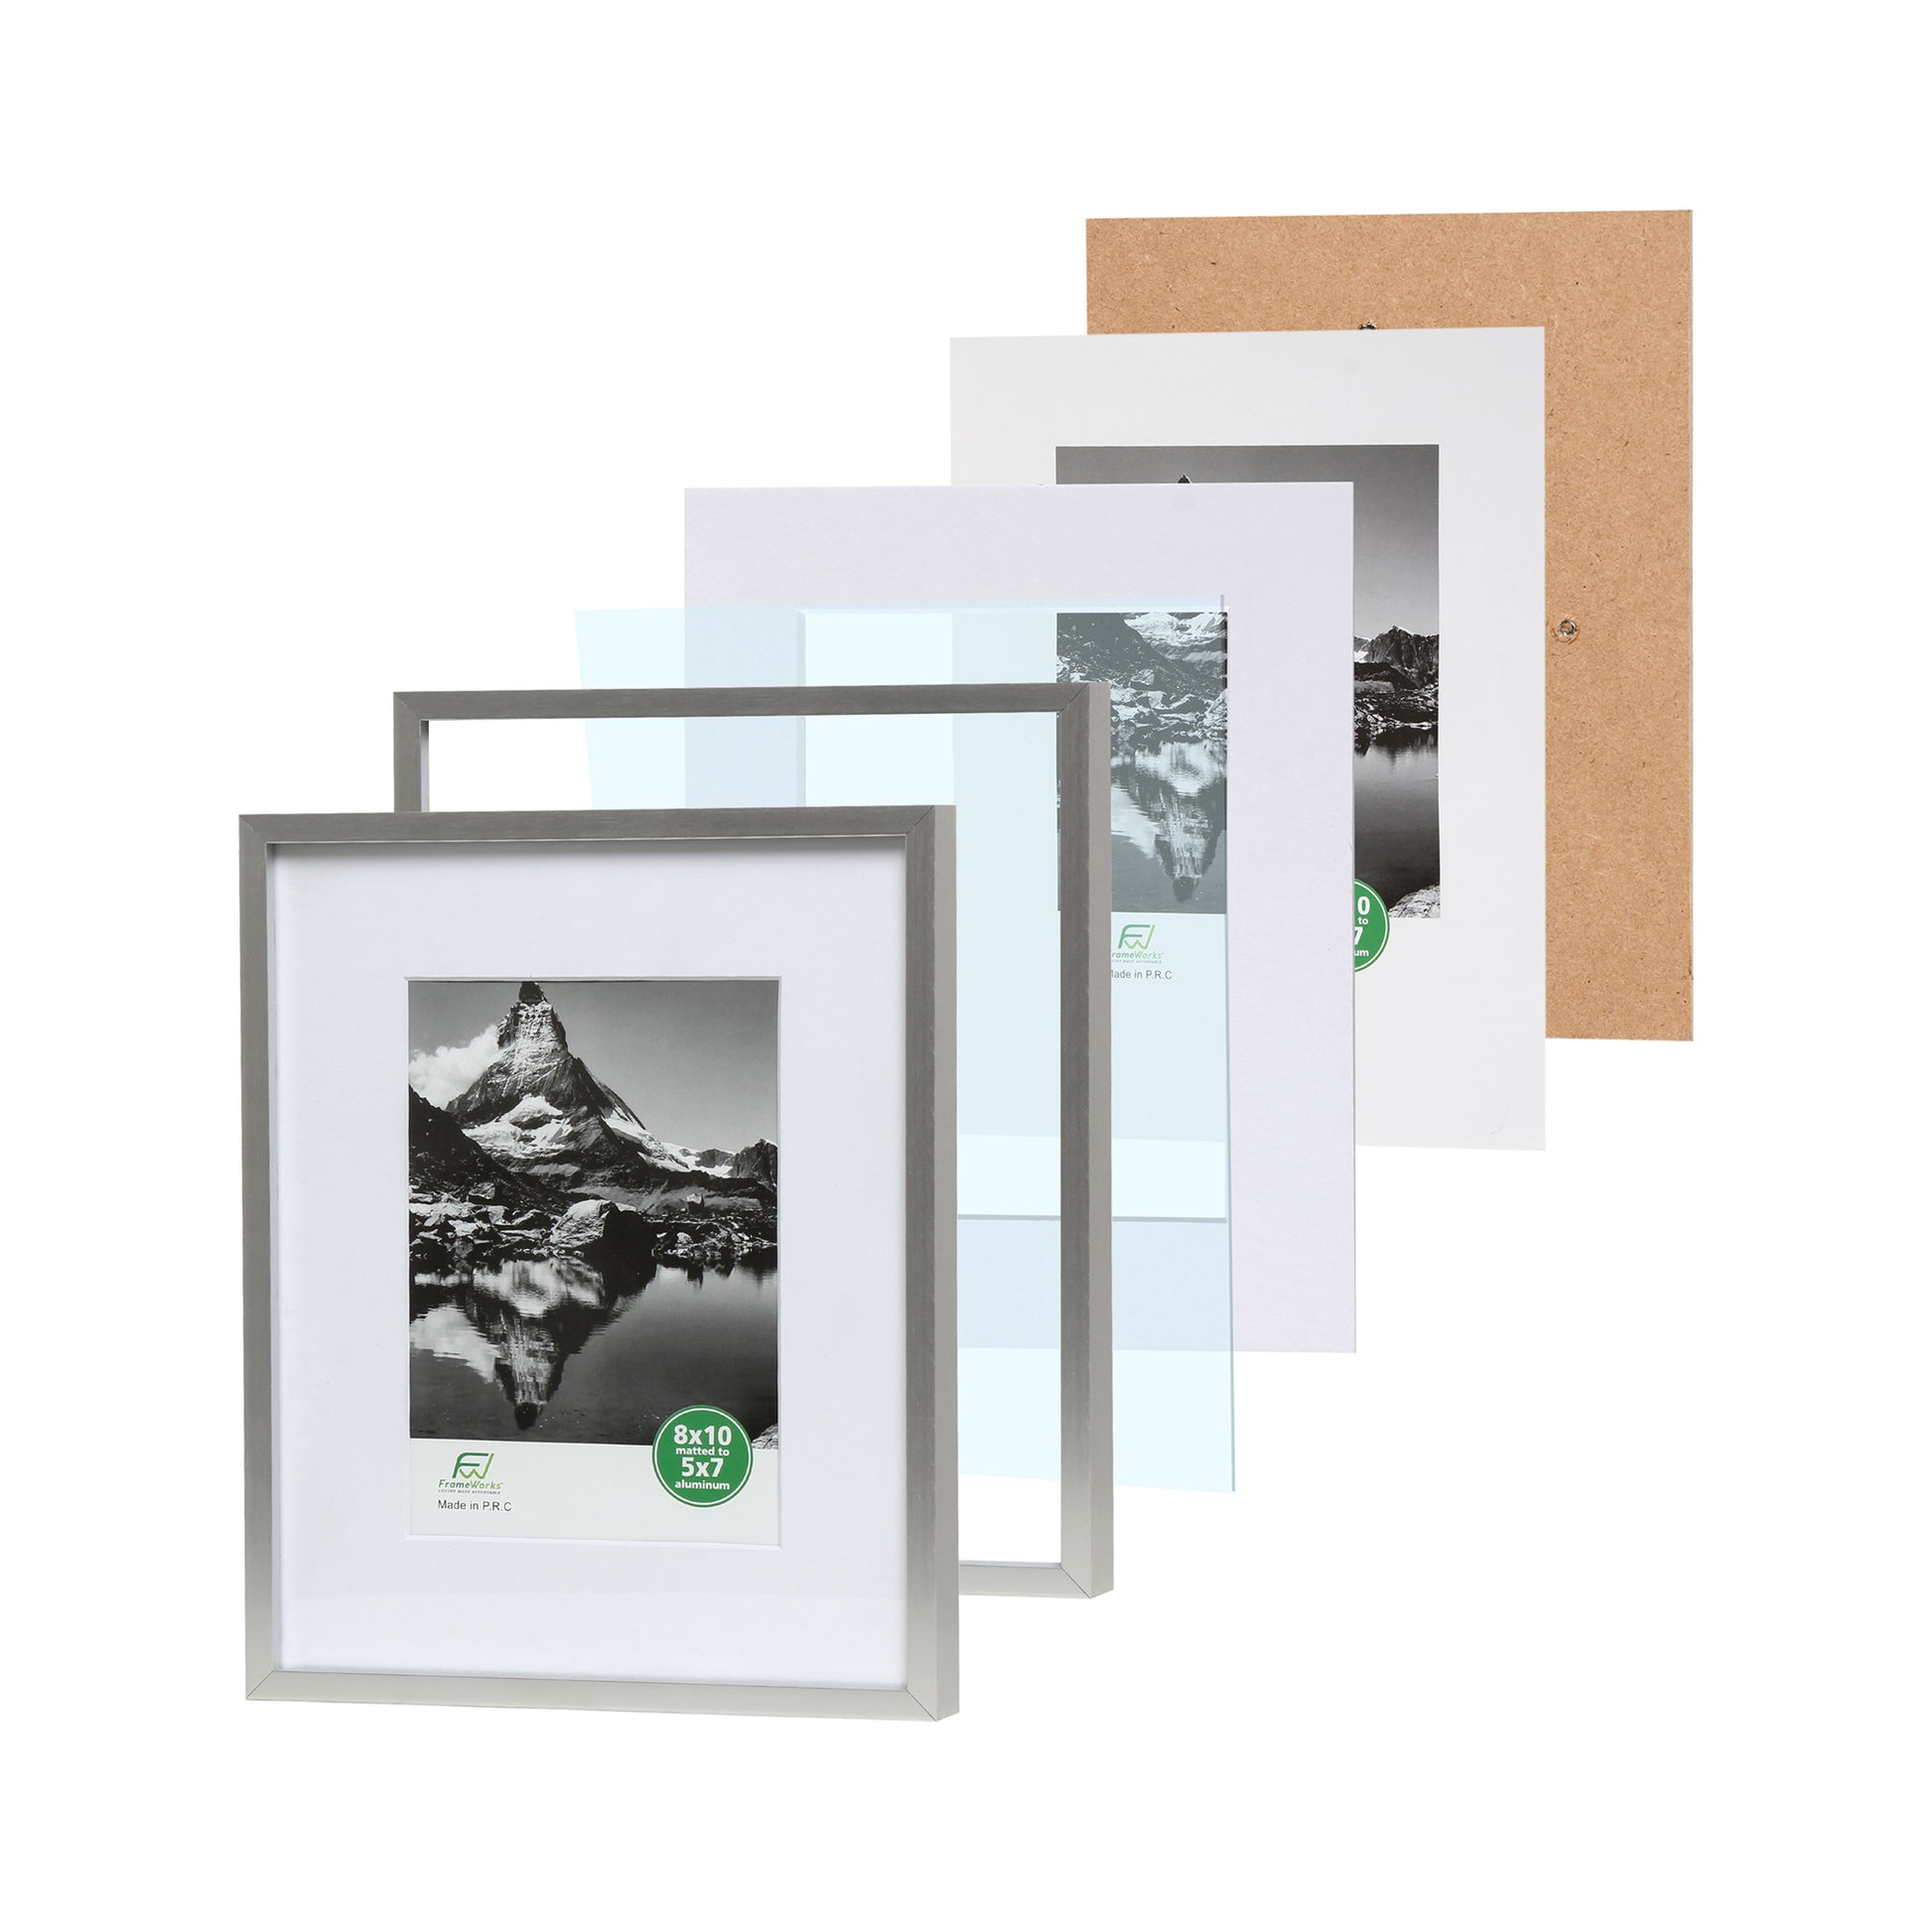 8 x 10 Deluxe Silver Aluminum Contemporary Picture Frame, 5 x 7